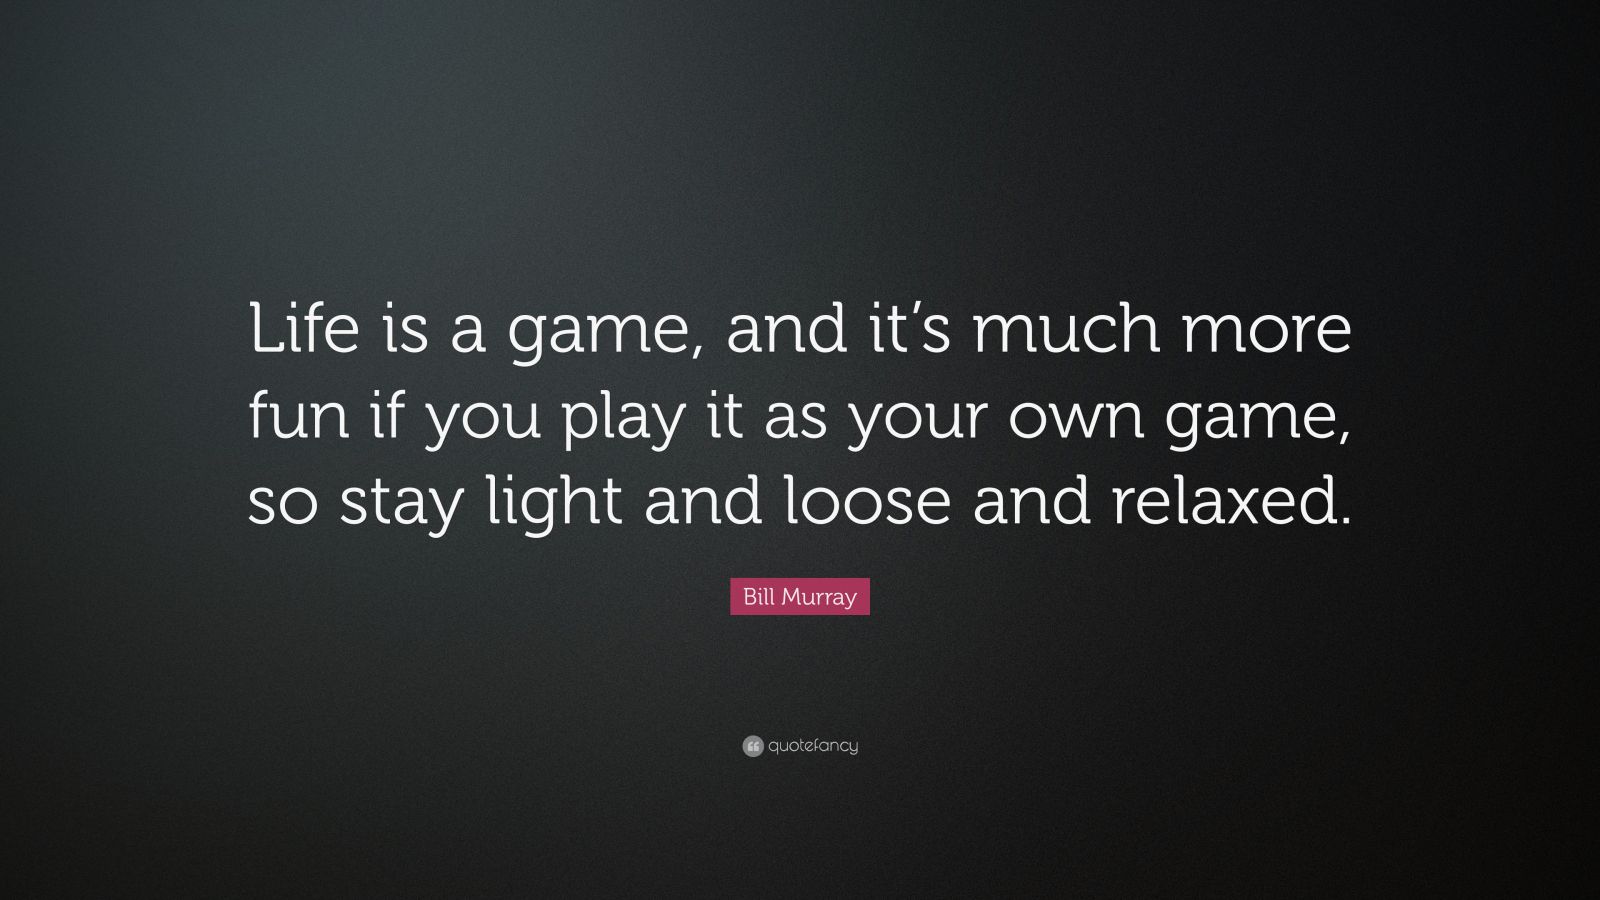 Bill Murray Quote: “Life is a game, and it's much more fun if you play it